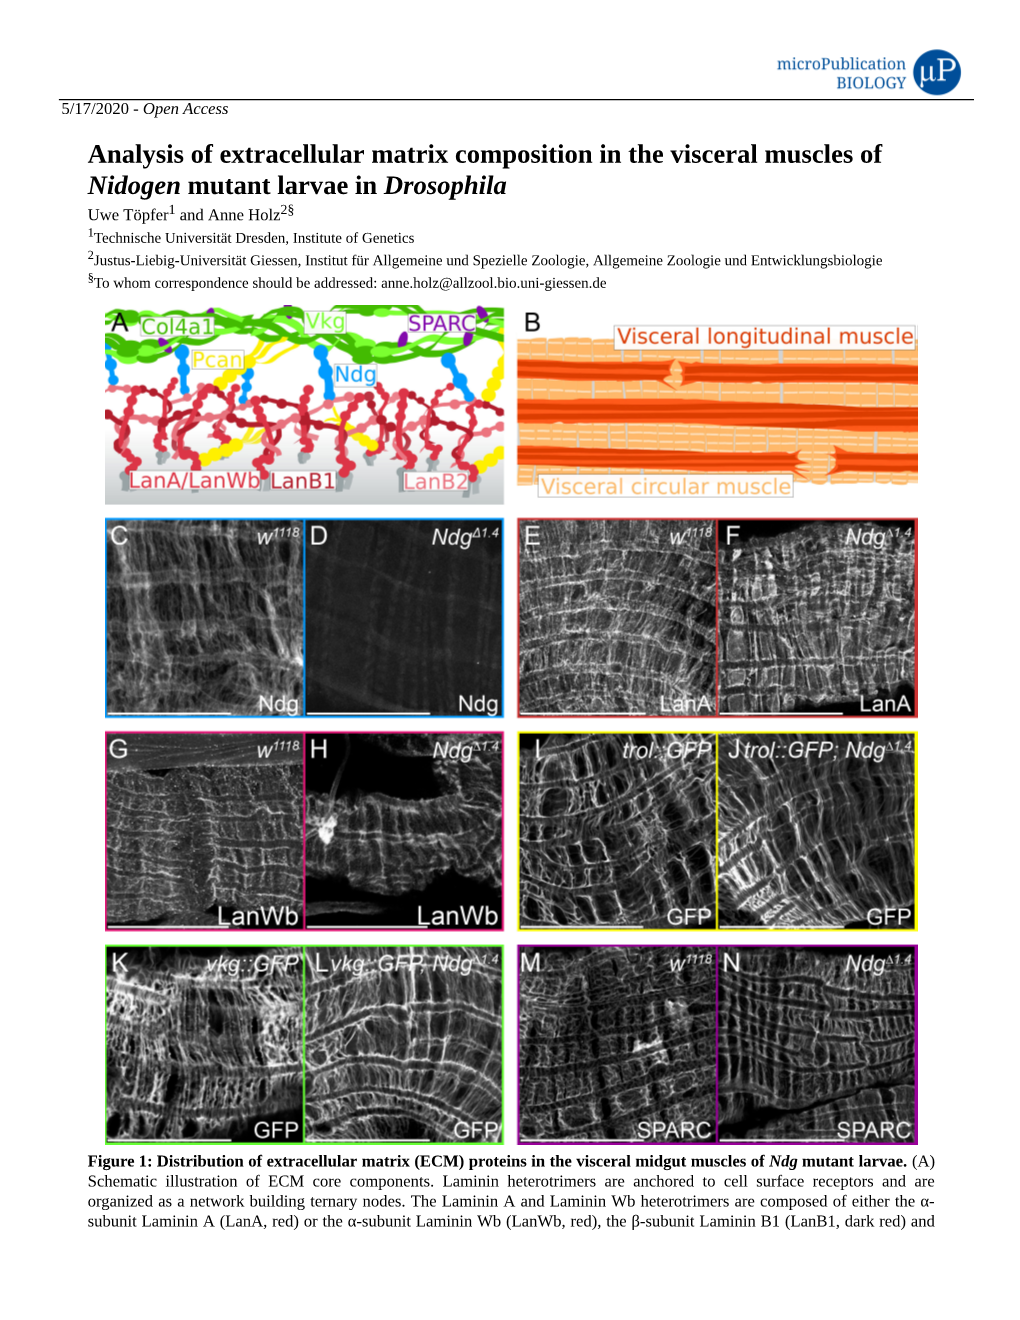 Analysis of Extracellular Matrix Composition in the Visceral Muscles